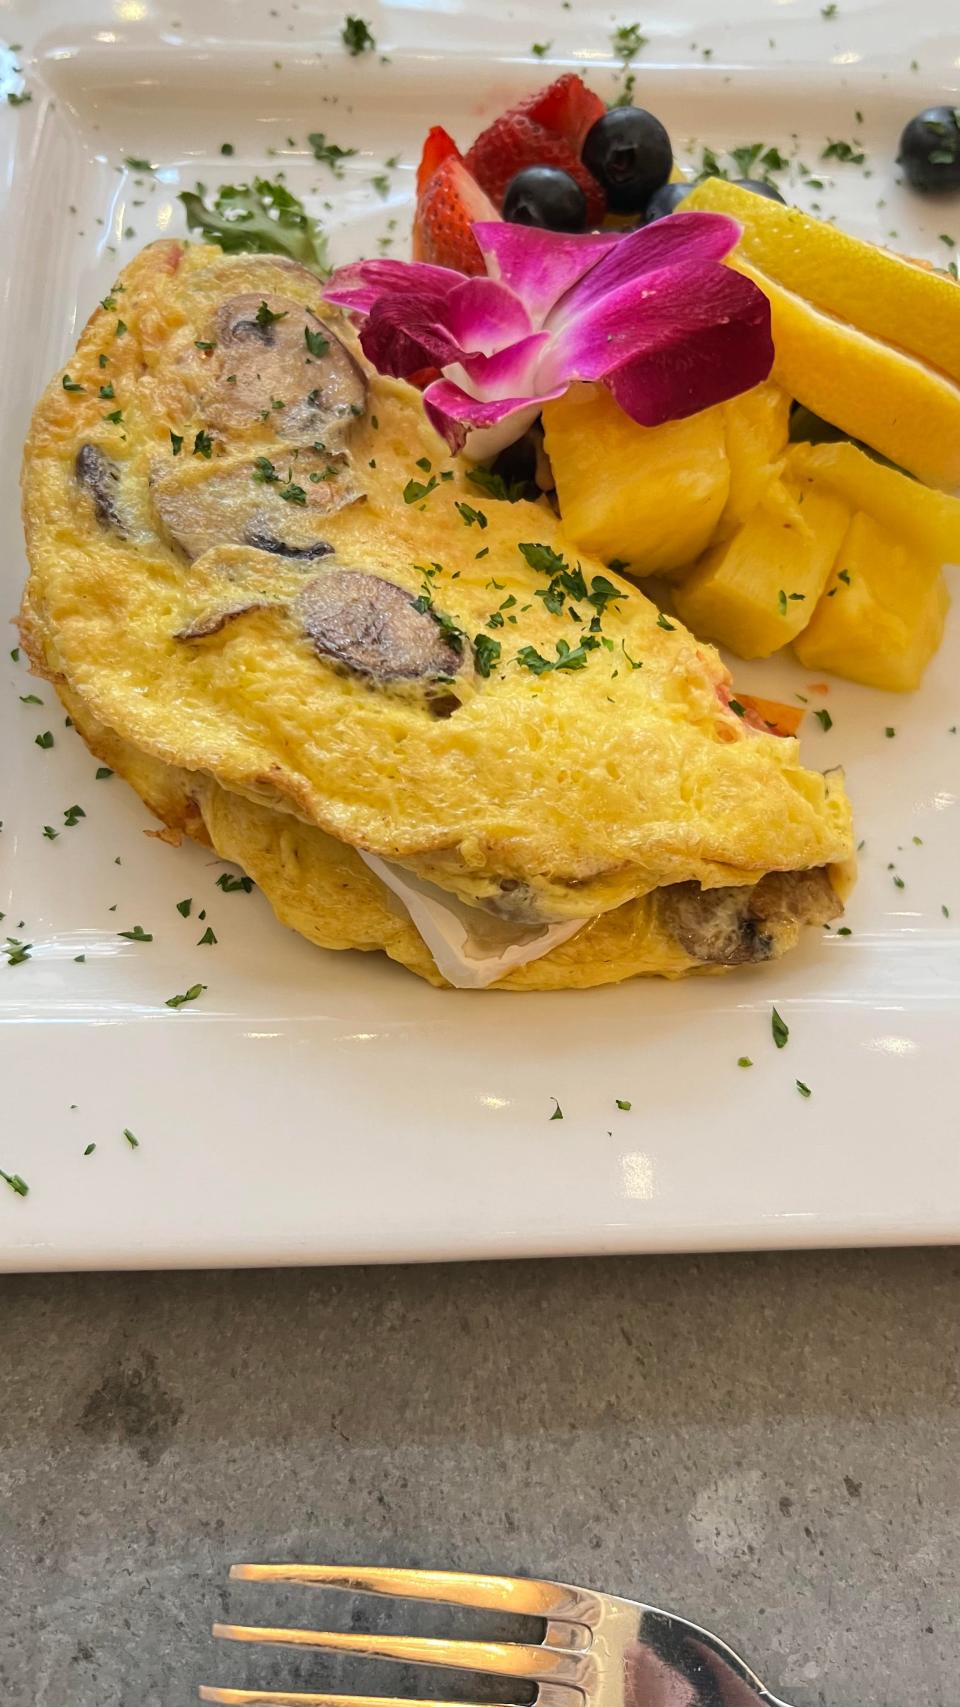 The fluffy brie and mushroom omelette at La Grande Martier in Stuart was filled with a generous portion of sauteed mushrooms, chopped tomatoes, and slices of brie.